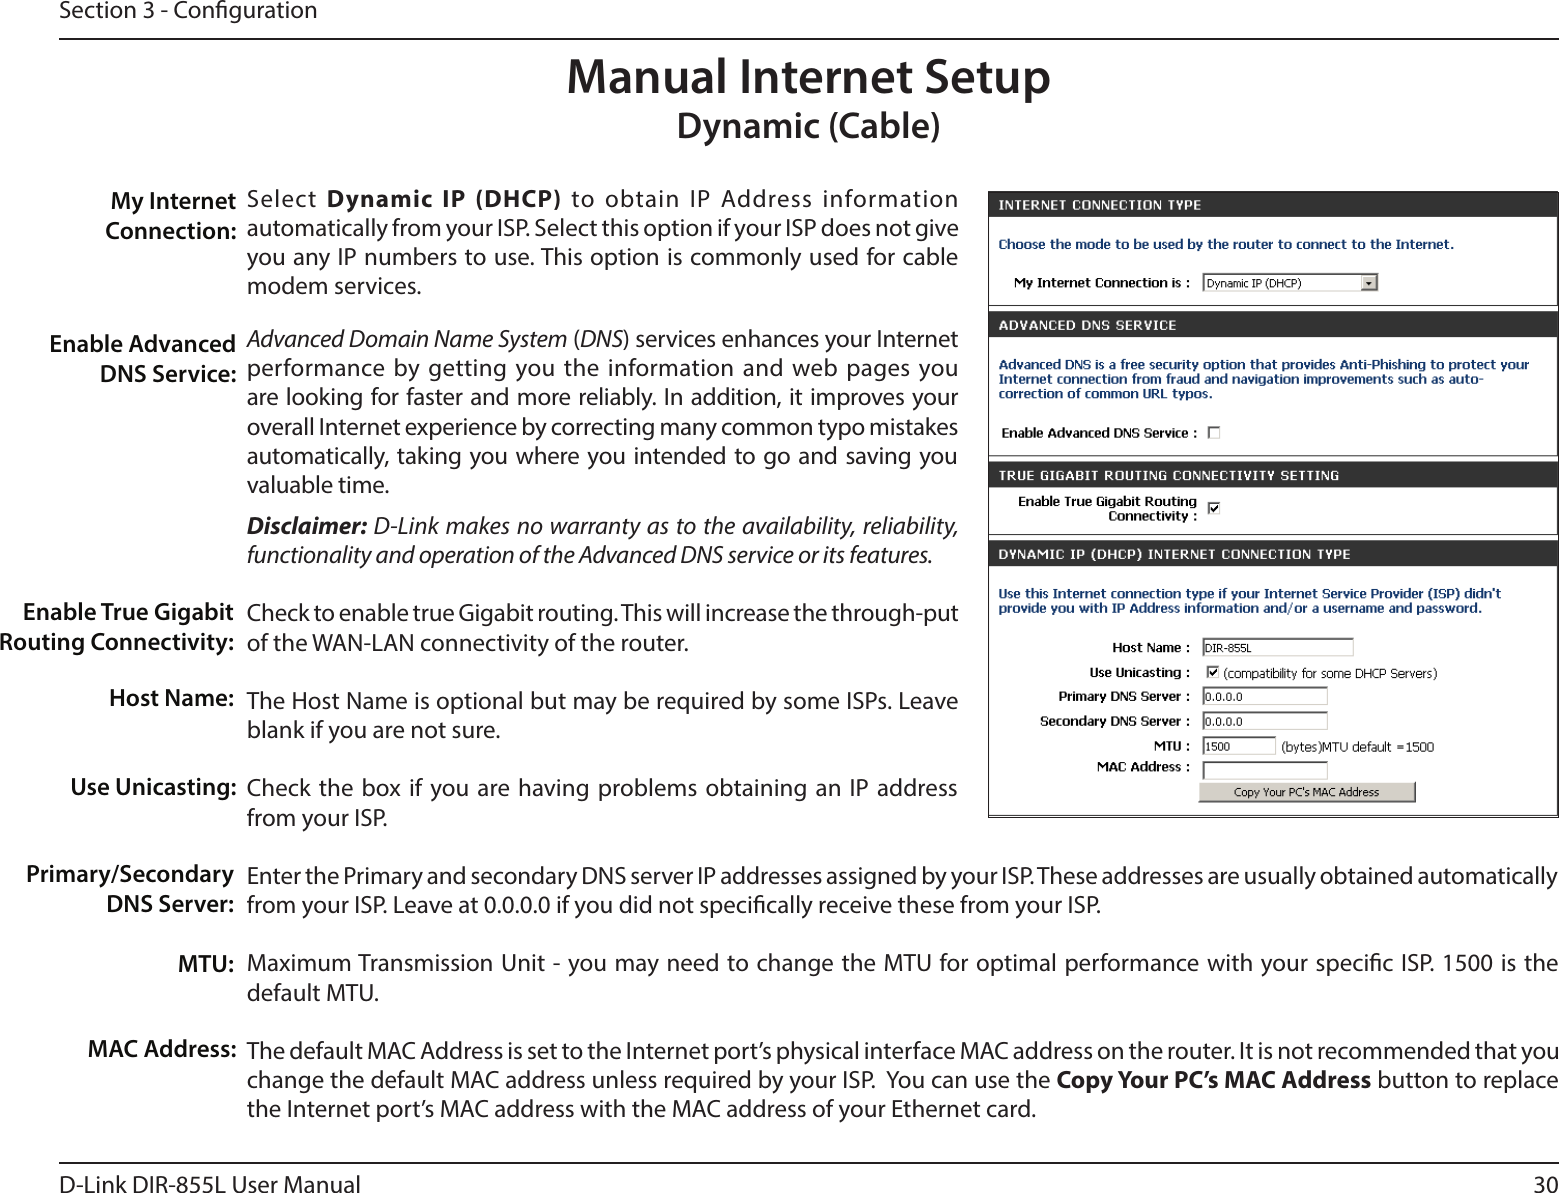 30D-Link DIR-855L User ManualSection 3 - CongurationSelect  Dynamic IP (DHCP) to obtain IP Address information automatically from your ISP. Select this option if your ISP does not give you any IP numbers to use. This option is commonly used for cable modem services.Advanced Domain Name System (DNS) services enhances your Internet performance by getting you the information and web pages you are looking for faster and more reliably. In addition, it improves your overall Internet experience by correcting many common typo mistakes automatically, taking you where you intended to go and saving you valuable time.Disclaimer: D-Link makes no warranty as to the availability, reliability, functionality and operation of the Advanced DNS service or its features.Check to enable true Gigabit routing. This will increase the through-put of the WAN-LAN connectivity of the router.The Host Name is optional but may be required by some ISPs. Leave blank if you are not sure.Check the box if you are having problems obtaining an IP address from your ISP.Enter the Primary and secondary DNS server IP addresses assigned by your ISP. These addresses are usually obtained automatically from your ISP. Leave at 0.0.0.0 if you did not specically receive these from your ISP.Maximum Transmission Unit - you may need to change the MTU for optimal performance with your specic ISP. 1500 is the default MTU.The default MAC Address is set to the Internet port’s physical interface MAC address on the router. It is not recommended that you change the default MAC address unless required by your ISP.  You can use the Copy Your PC’s MAC Address button to replace the Internet port’s MAC address with the MAC address of your Ethernet card.My Internet Connection:Enable Advanced DNS Service:Host Name:MAC Address:Manual Internet SetupDynamic (Cable)Primary/Secondary DNS Server:MTU:Use Unicasting:Enable True Gigabit Routing Connectivity: